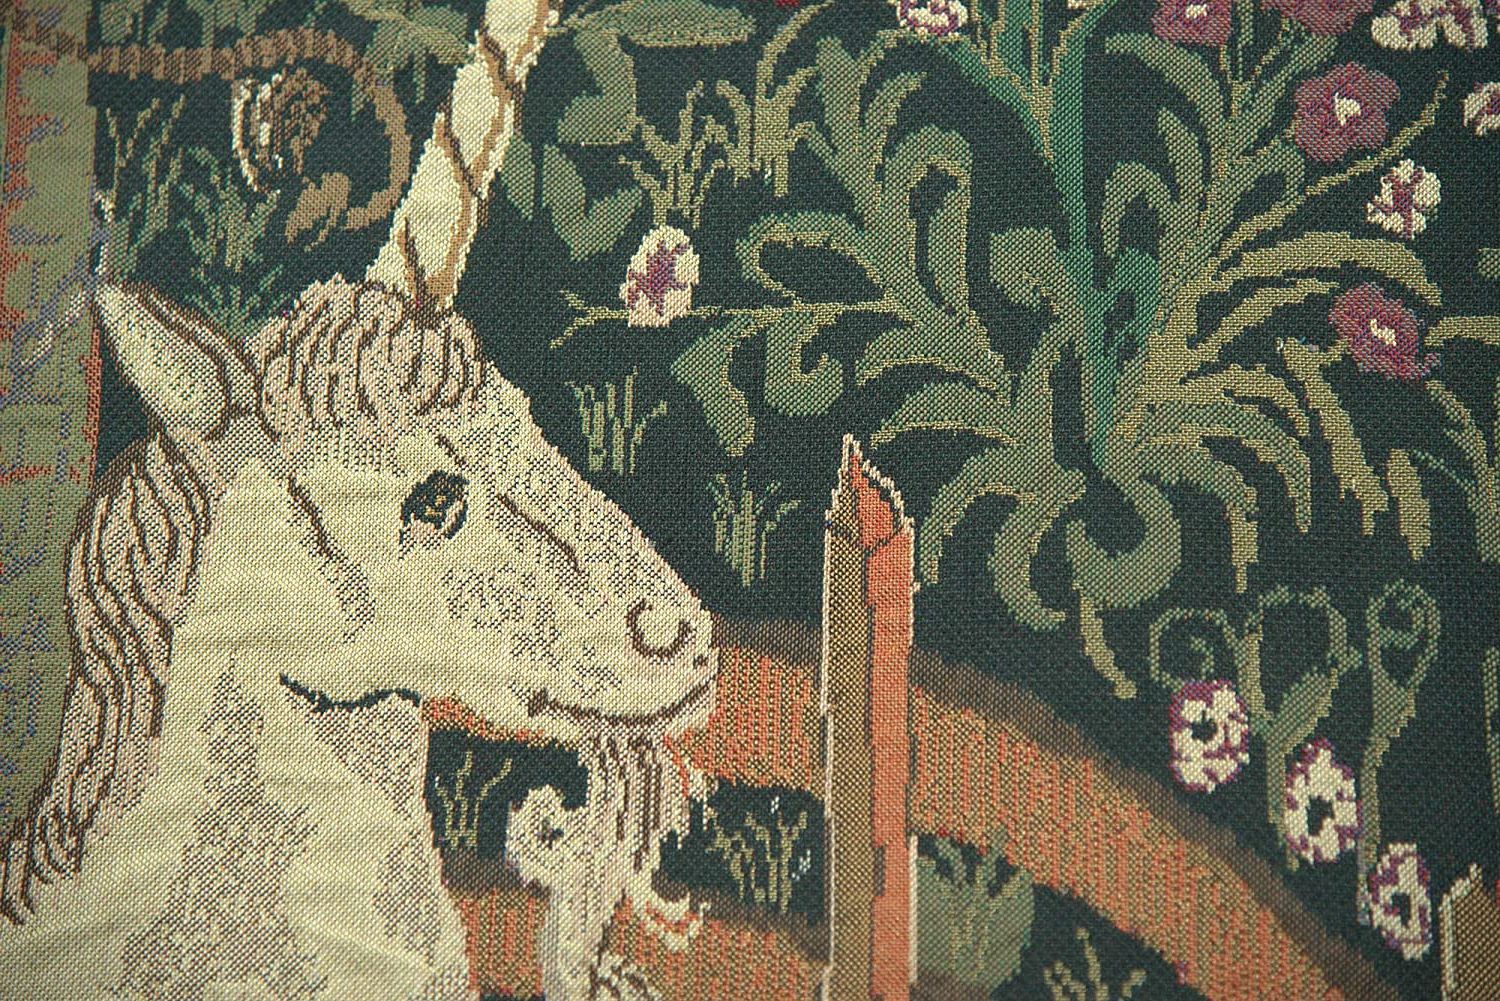 Popular Blended Fabric Unicorn In Captivity Ii (with Border) Wall Hangings Pertaining To Amazon: Charlotte Home Furnishing Inc (View 7 of 20)